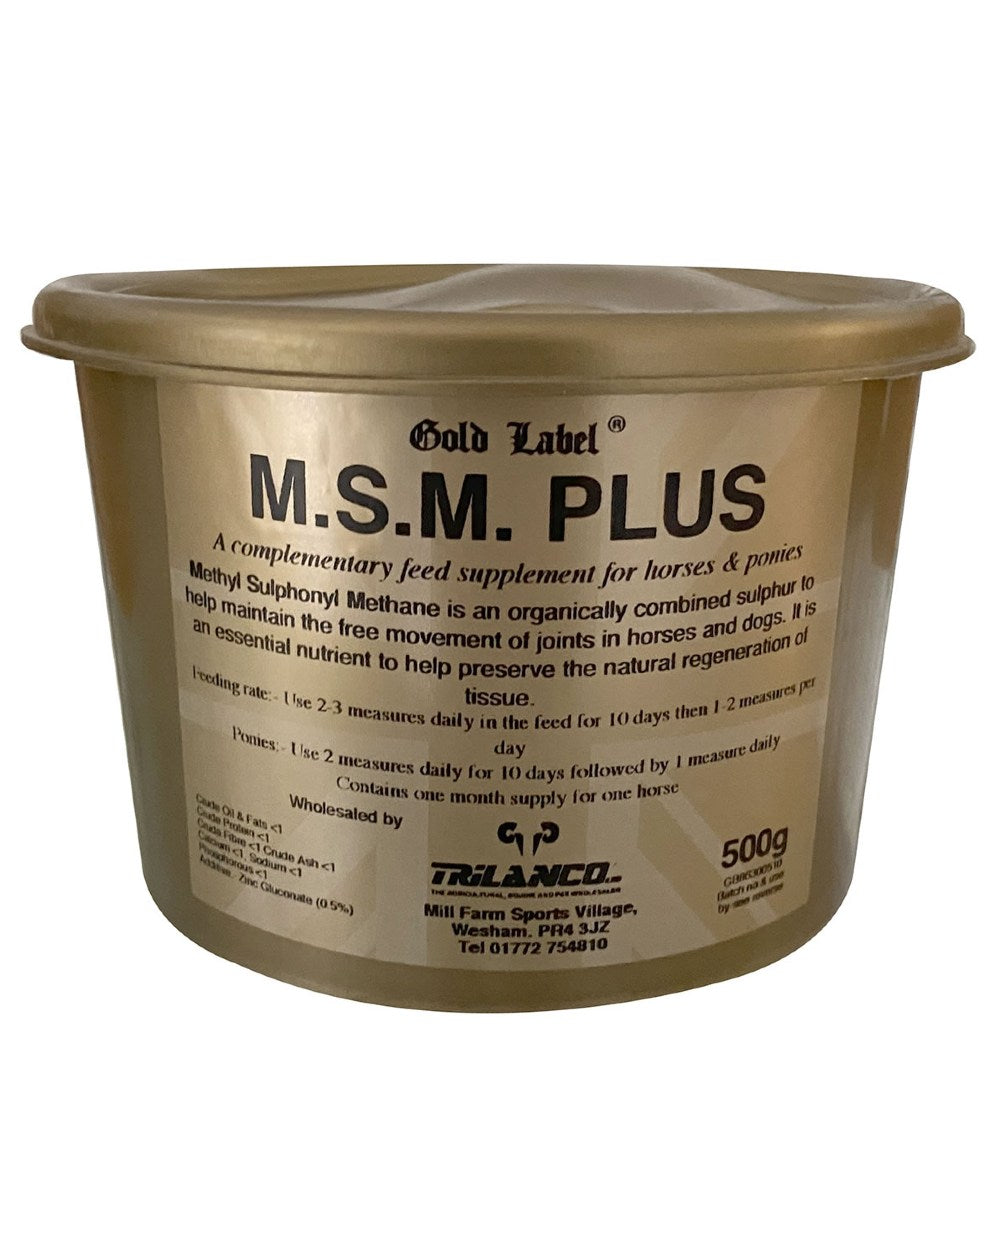 Gold Label M.S.M. Plus On A White Background